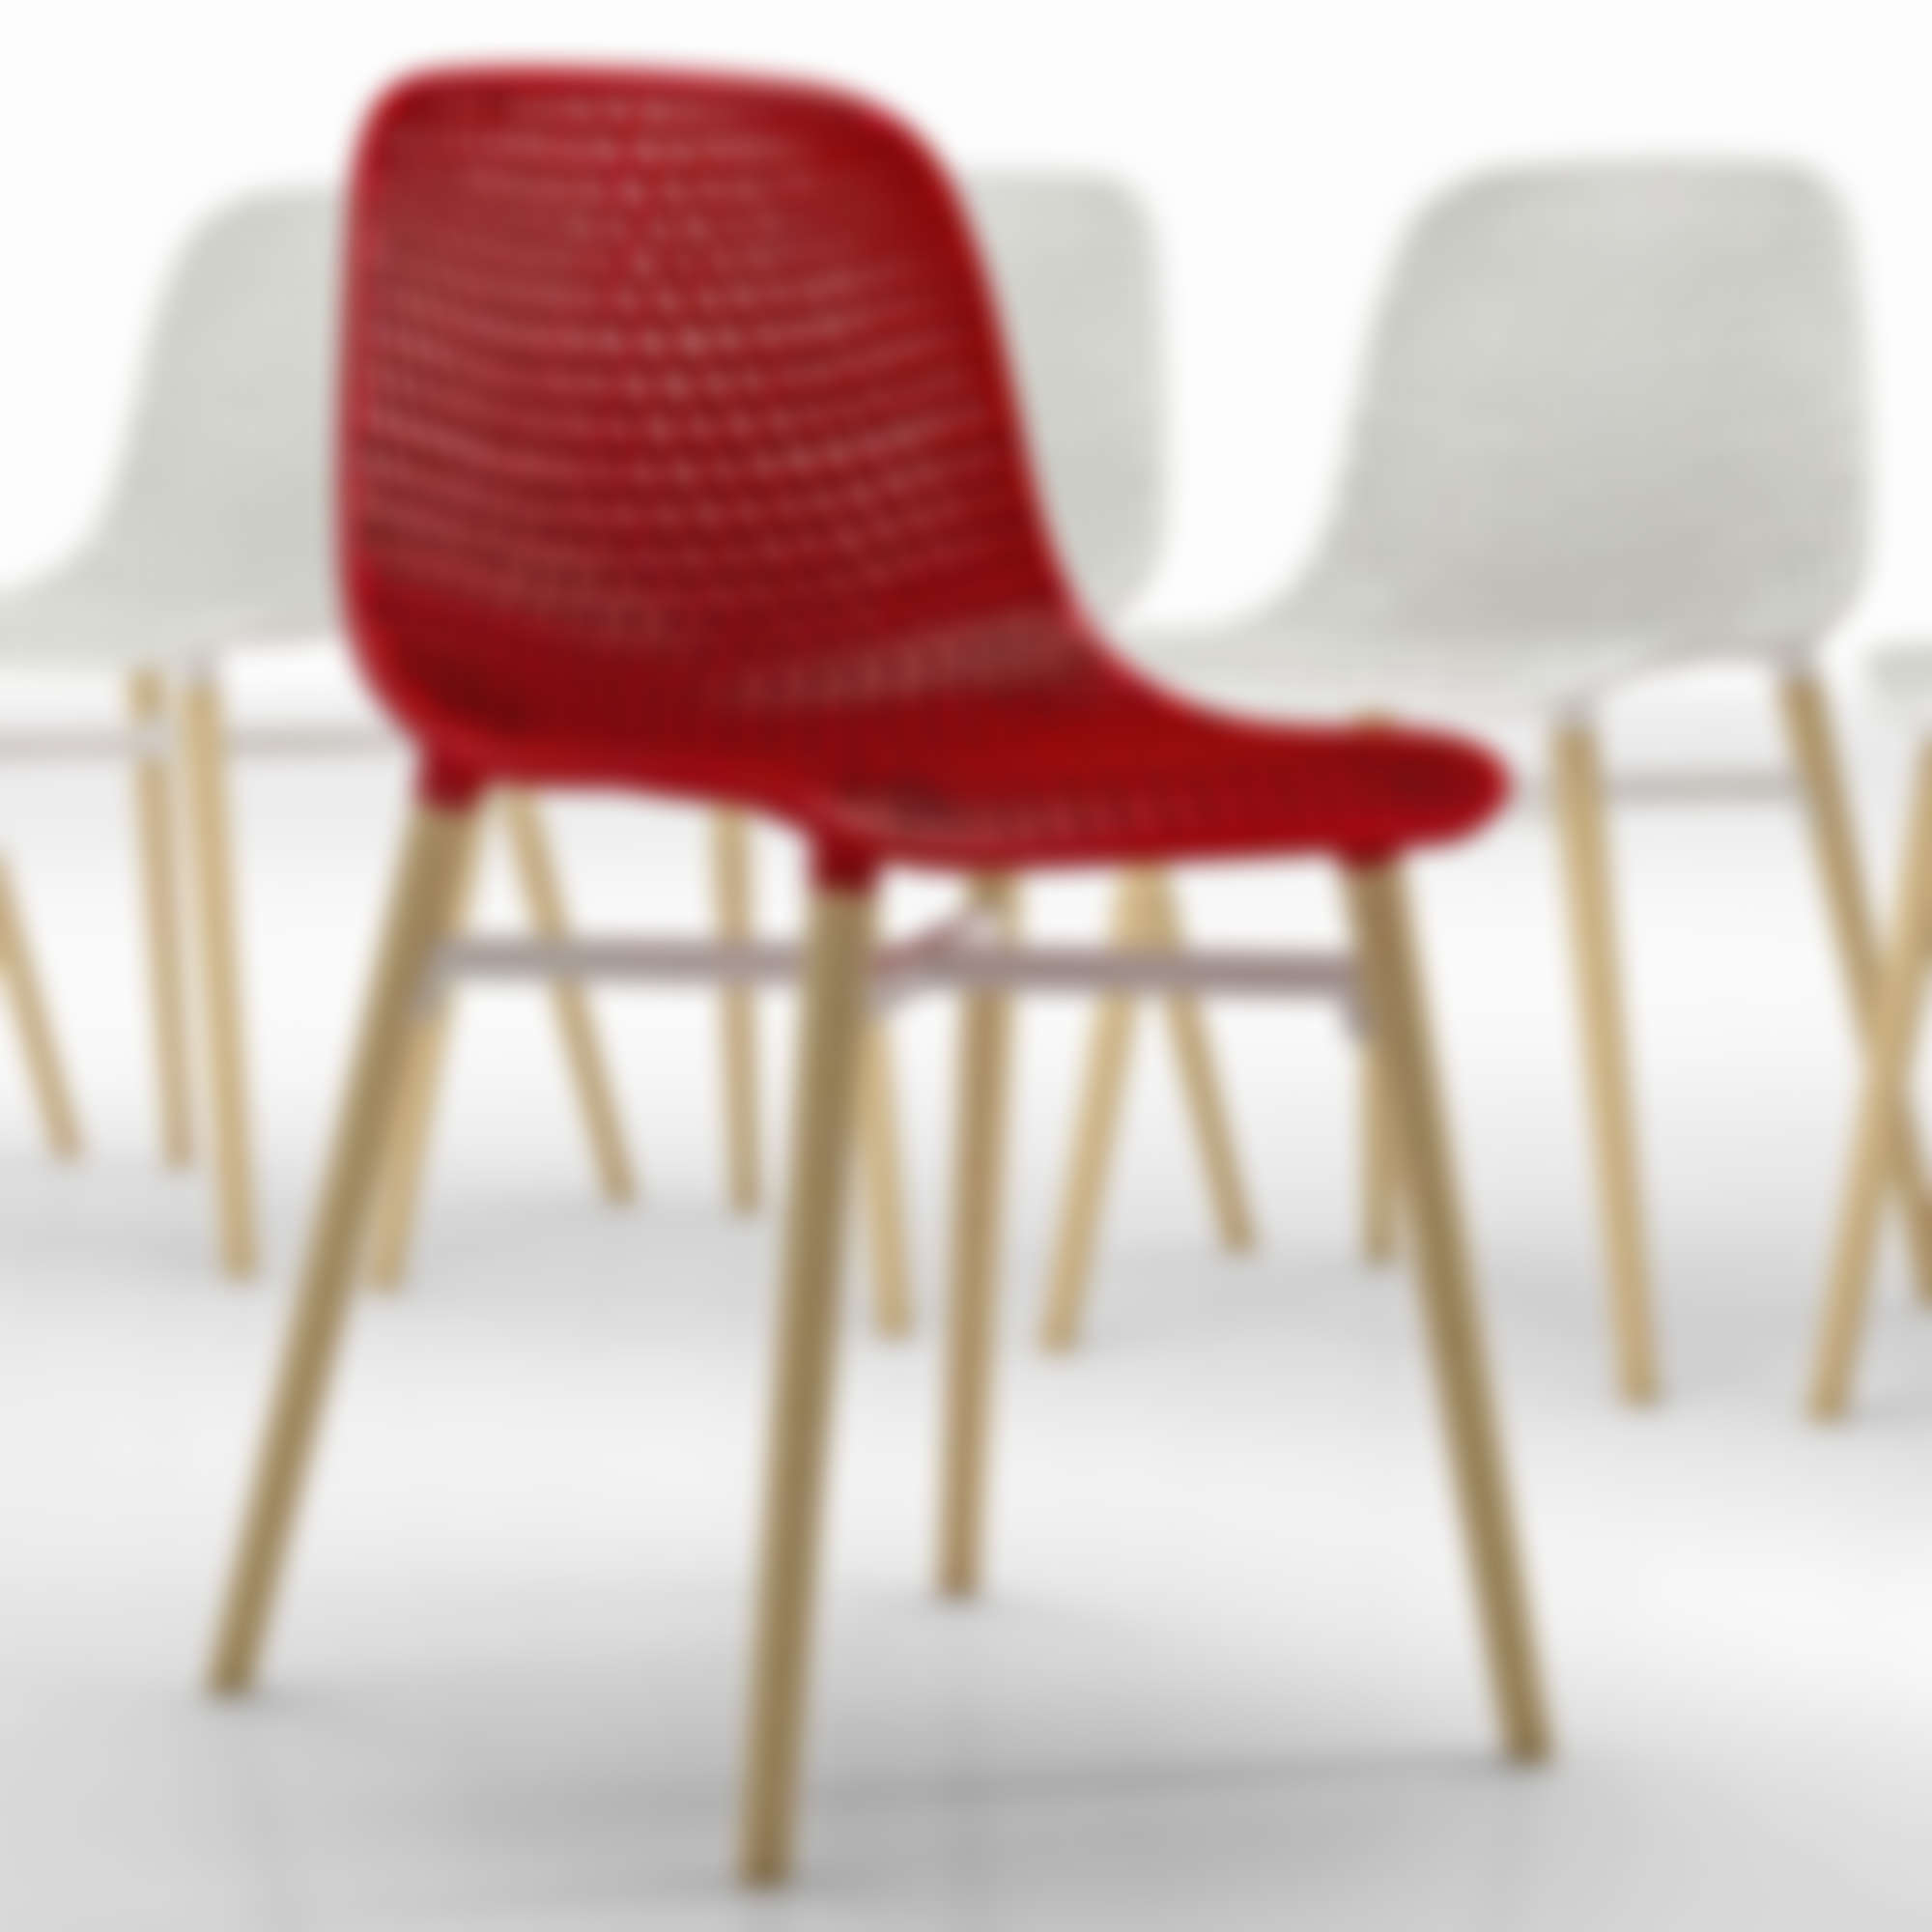 contemporary-next-red-andreas-oswald-wooden-legs-by-imperial-line-2